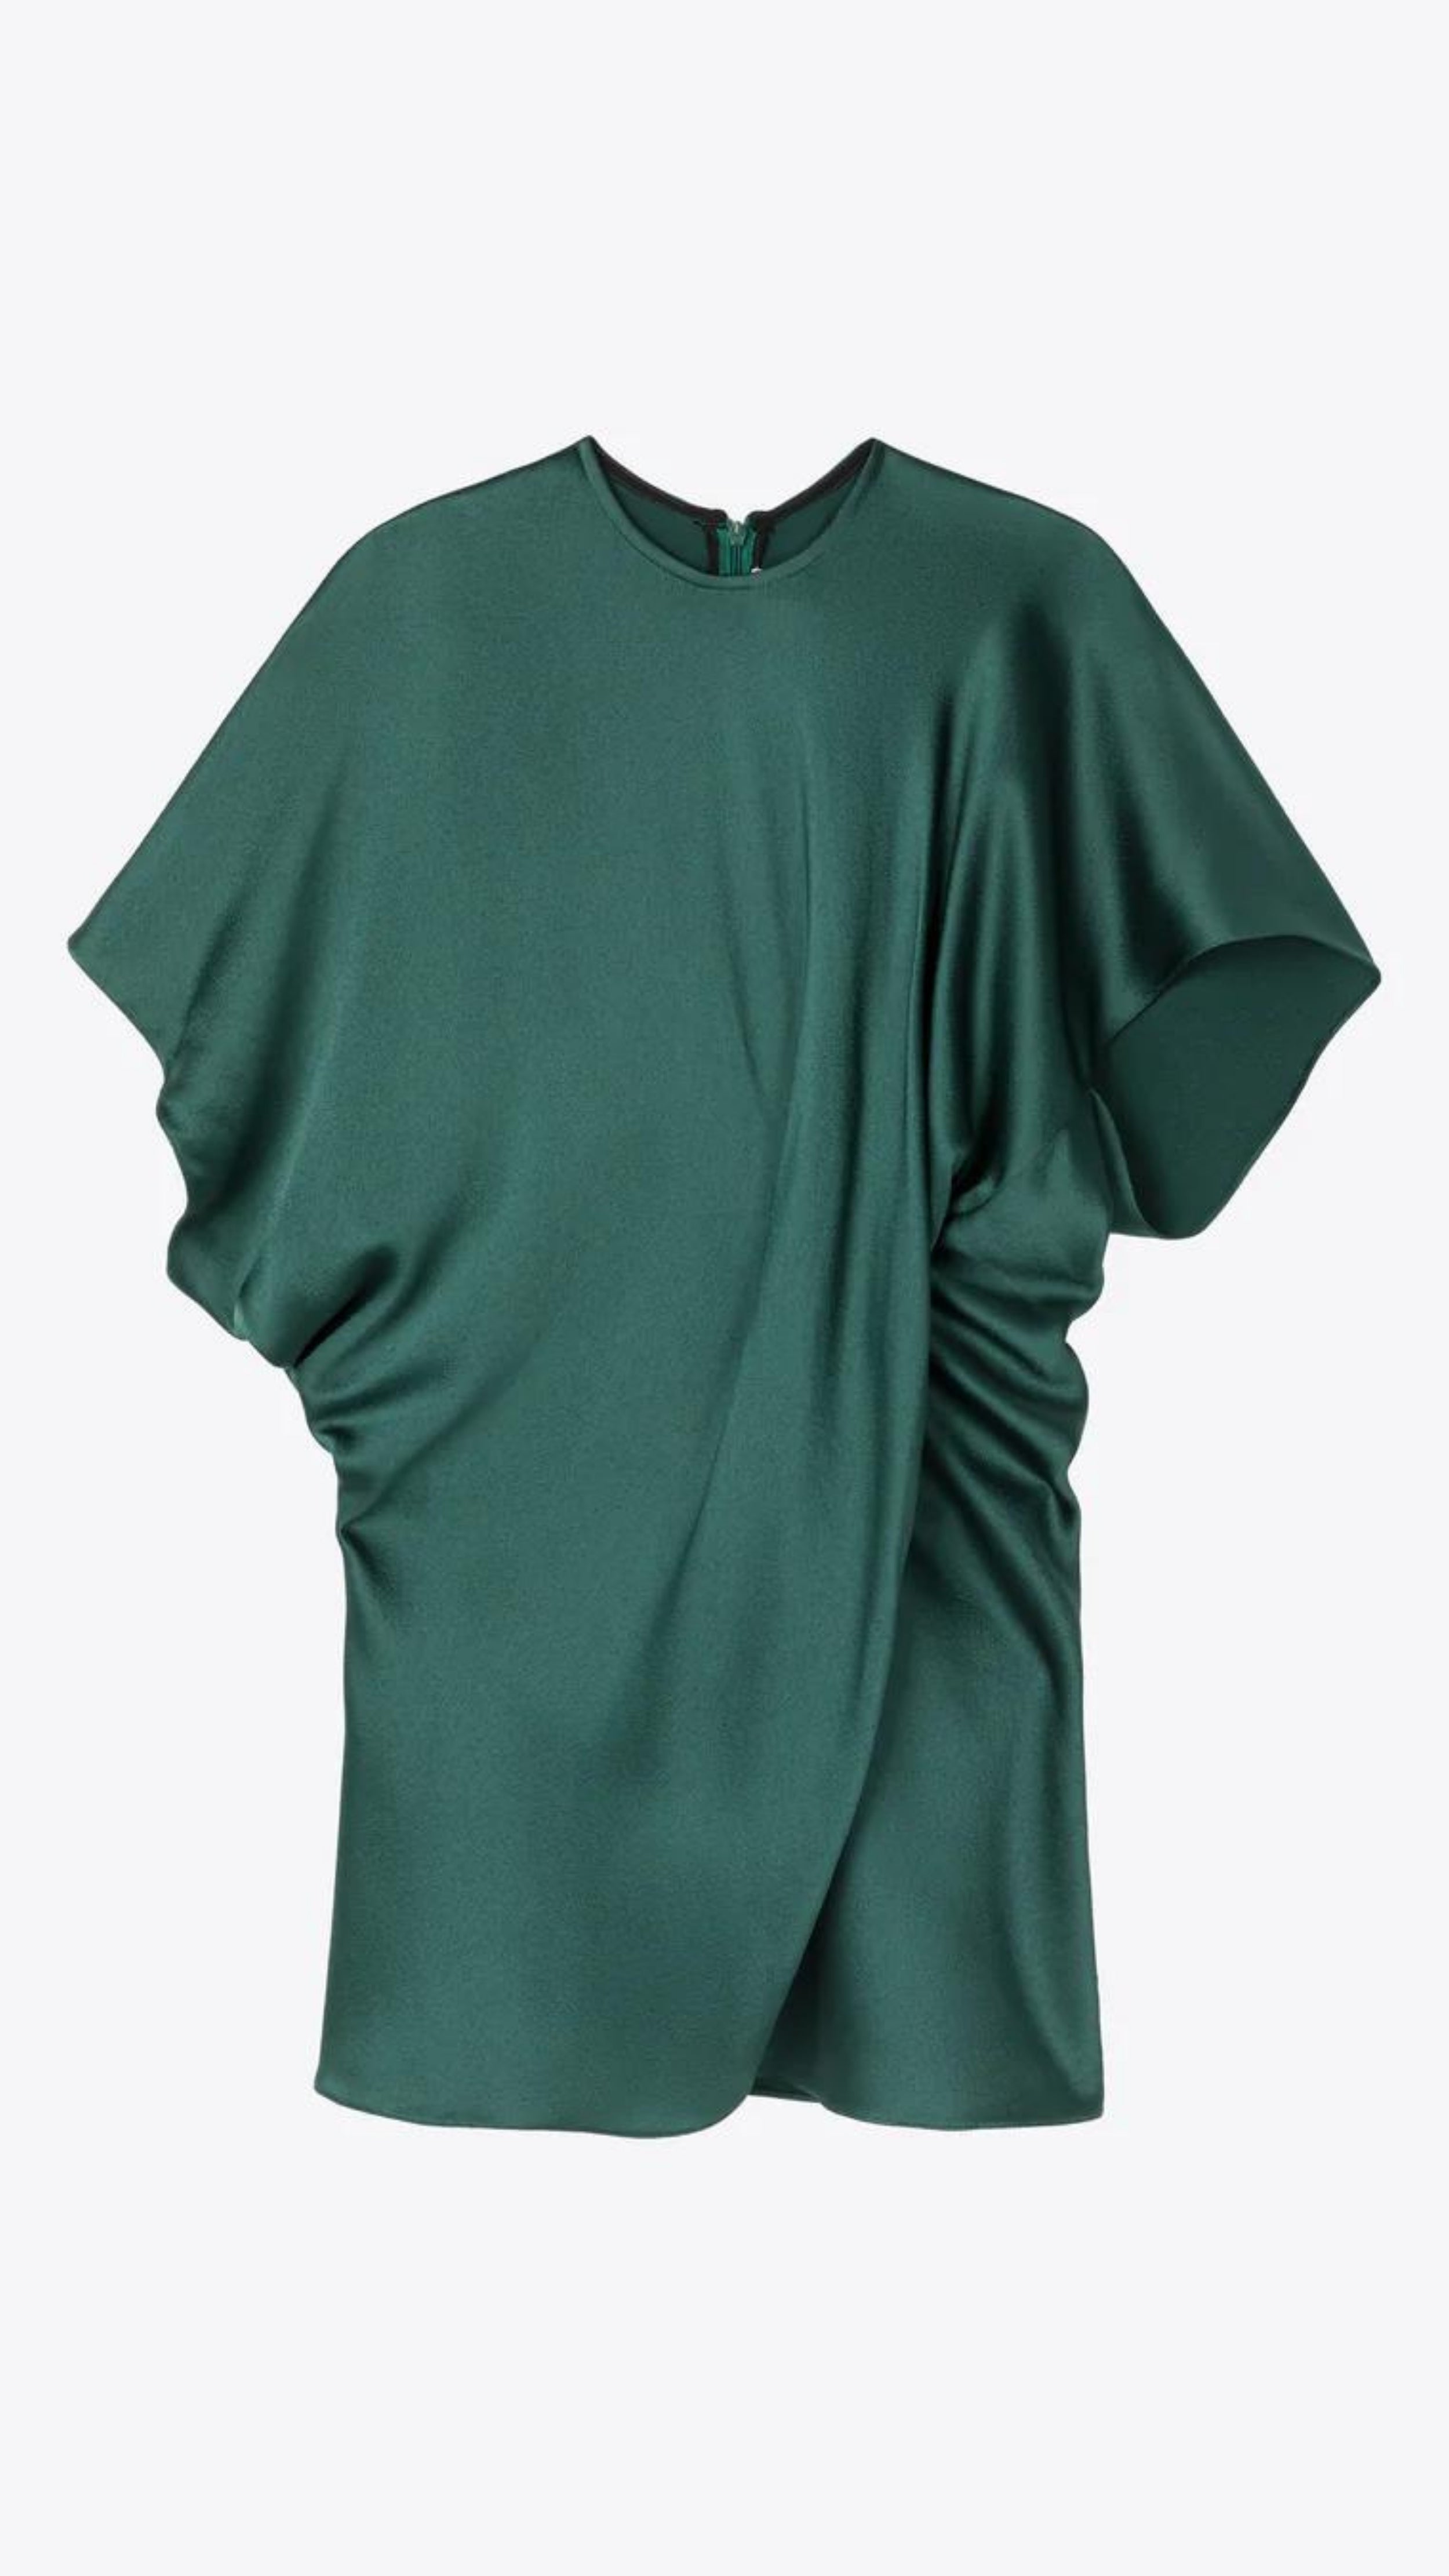 AZ Factory Colville Molly Molloy Lucinda Chambers, Asymmetric Satin Tee Shirt. Elegantly draped in forest green satin material in a classic tee shirt shape. Product photo from the front.